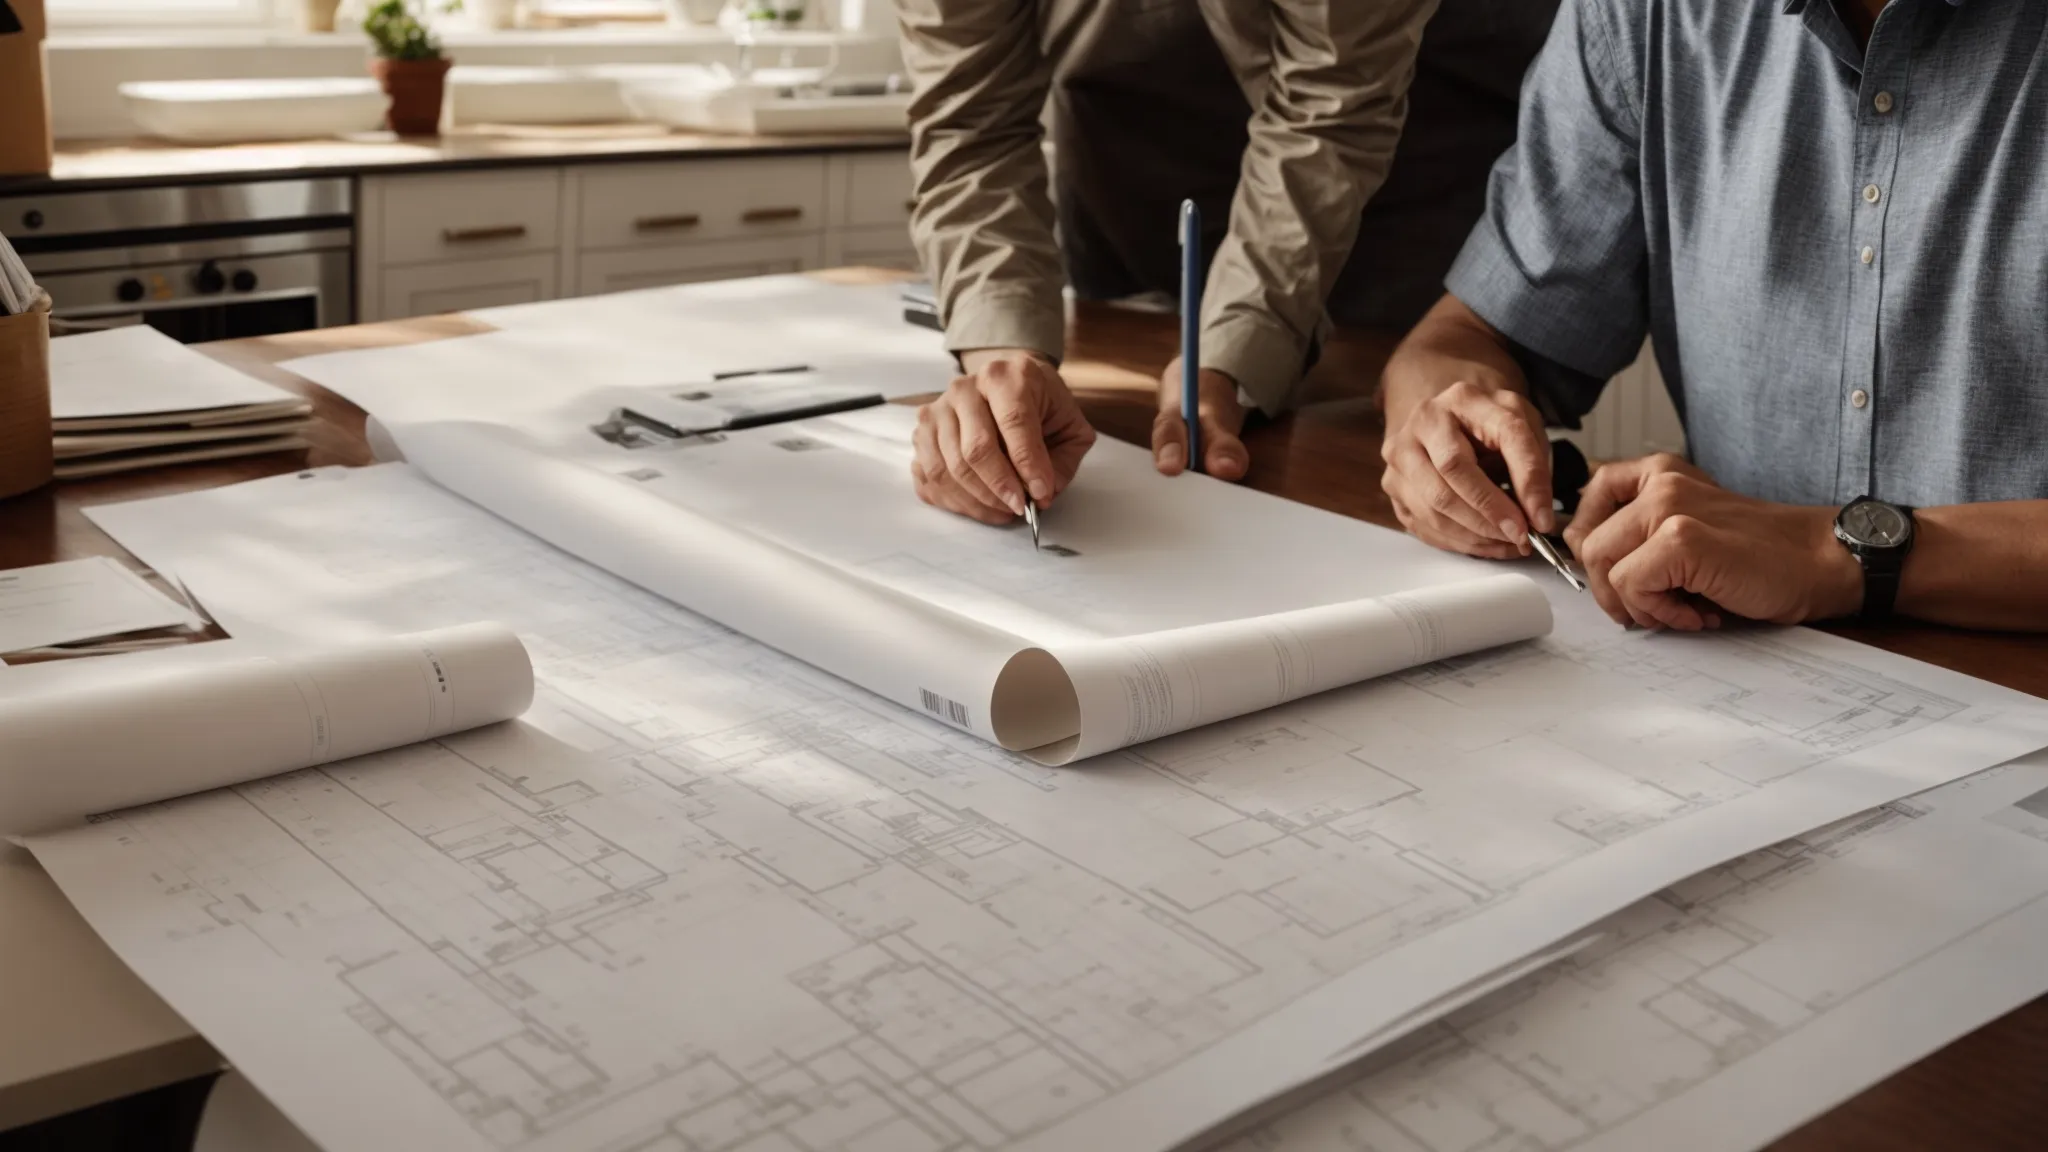 a homeowner reviews documents with a city official across a desk, surrounded by kitchen renovation blueprints.